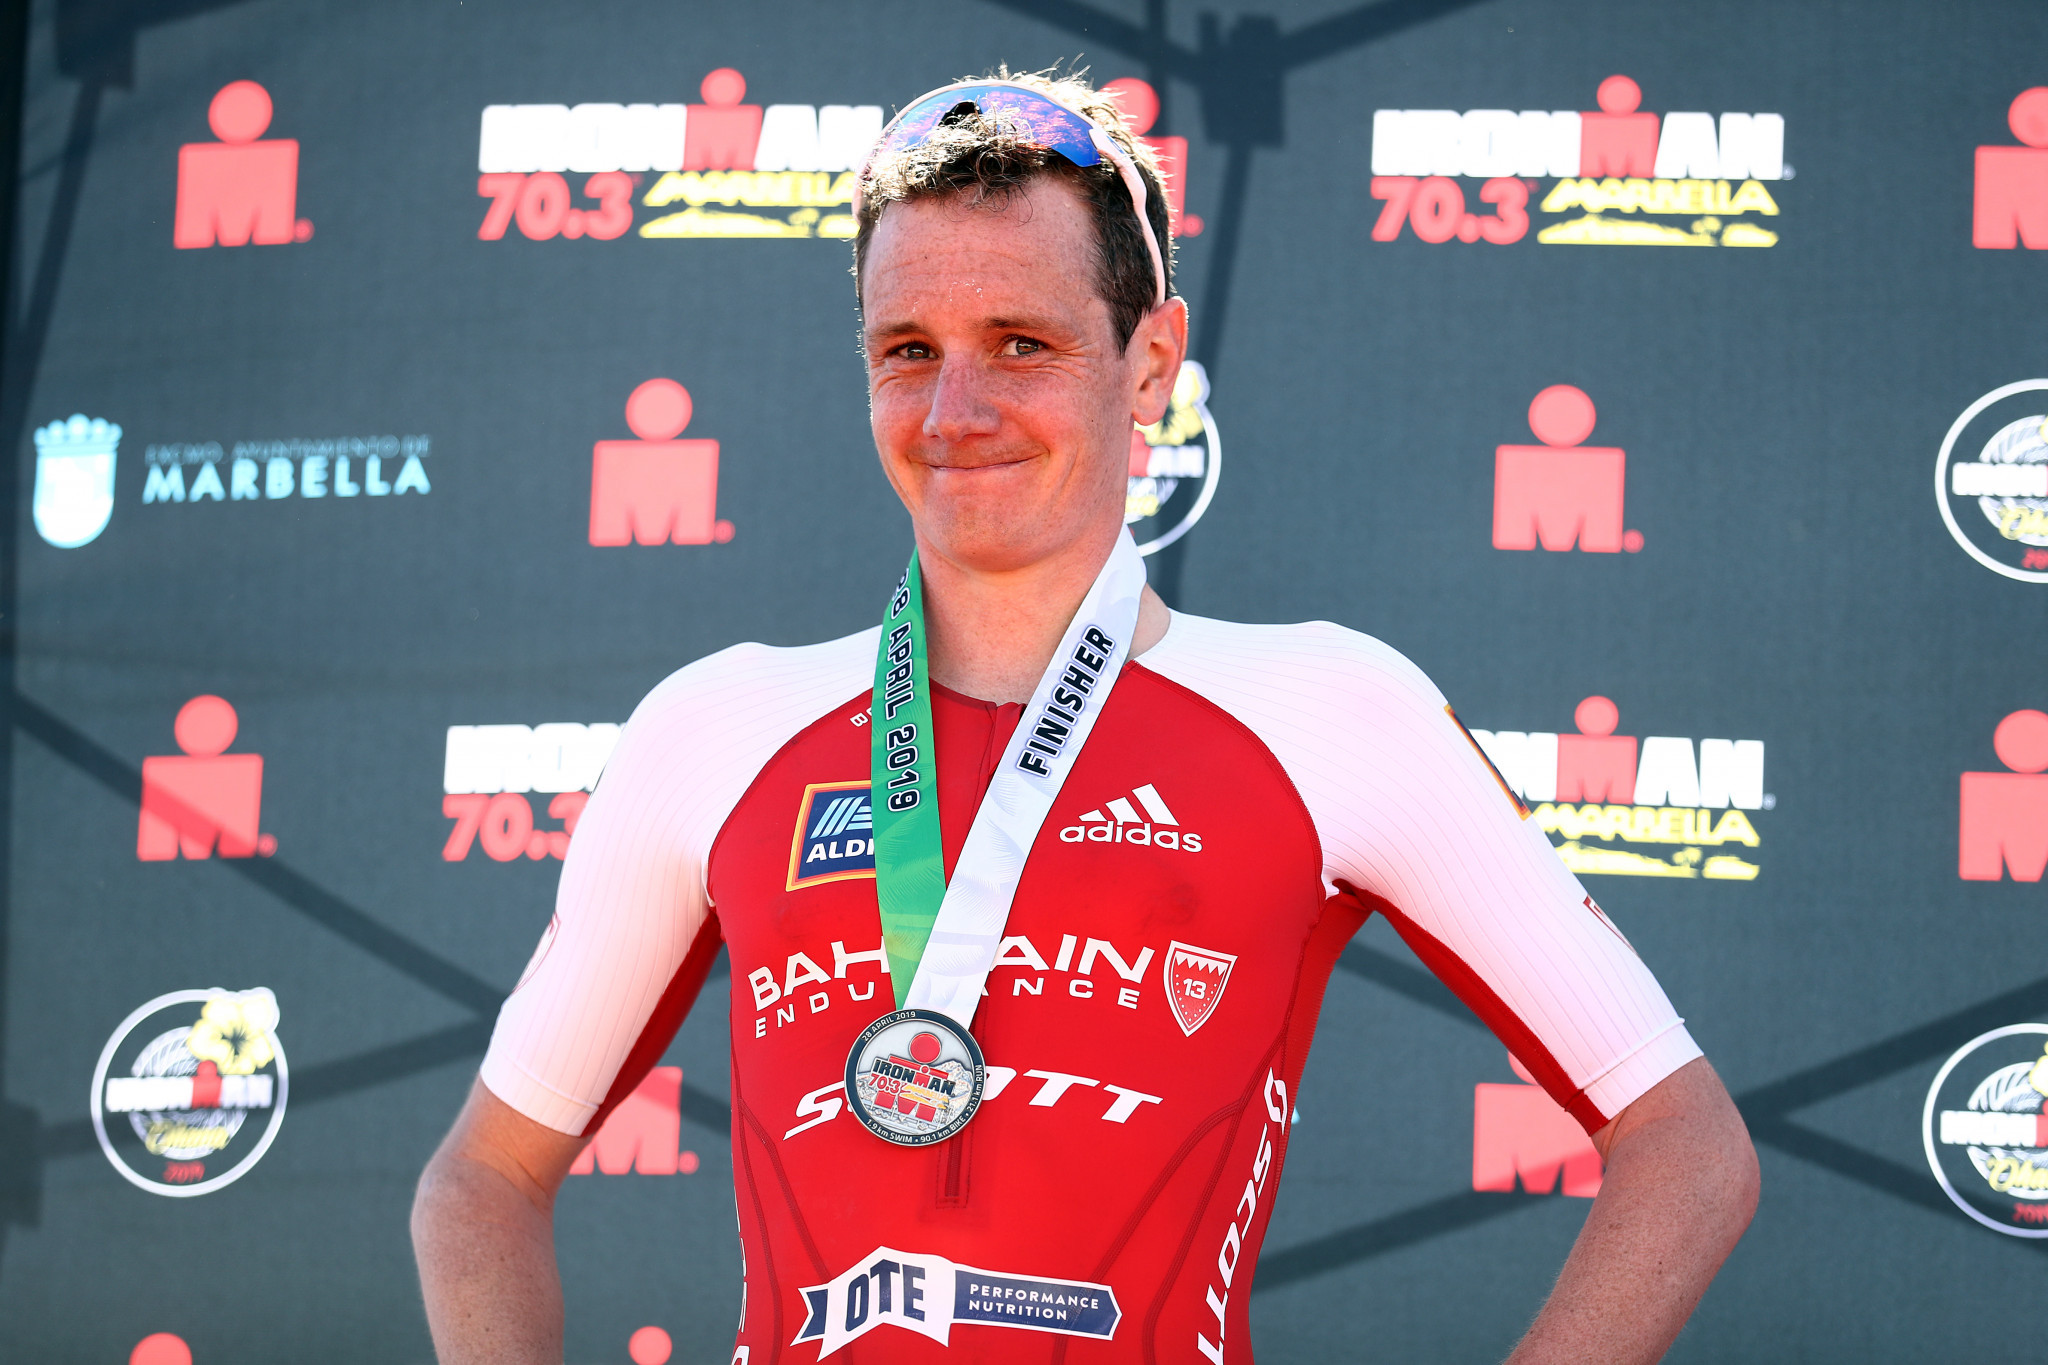 Alistair Brownlee has favourite tag for ETU Triathlon European Championships in the Netherlands